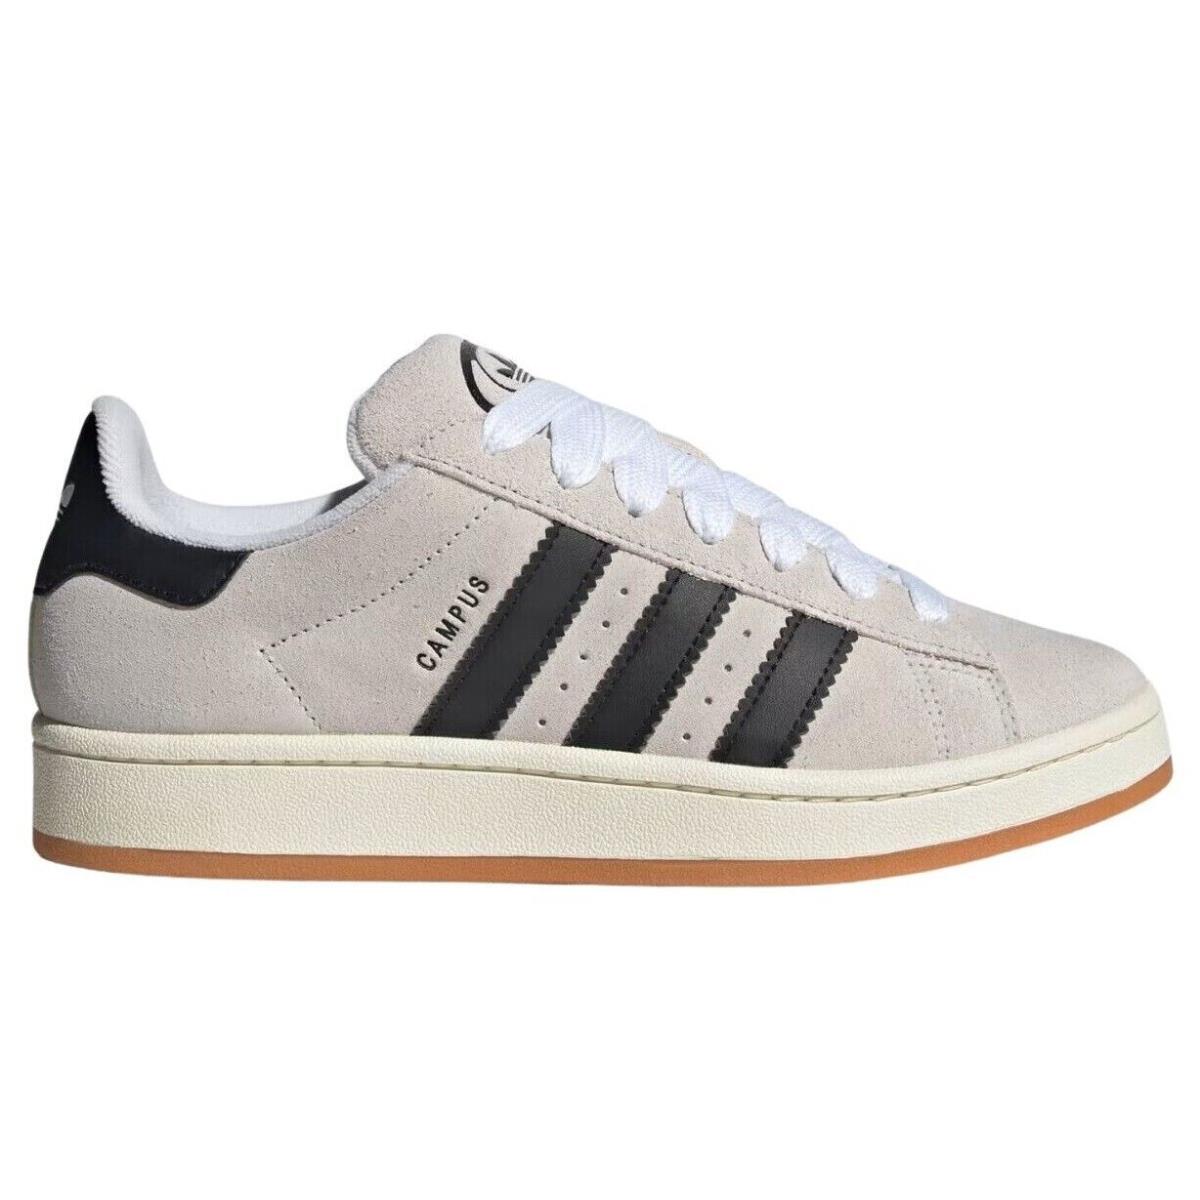 Adidas Originals Campus 00S Women`s Casual Shoes All Colors US Szs 5-11 Crystal White / Black / Off White